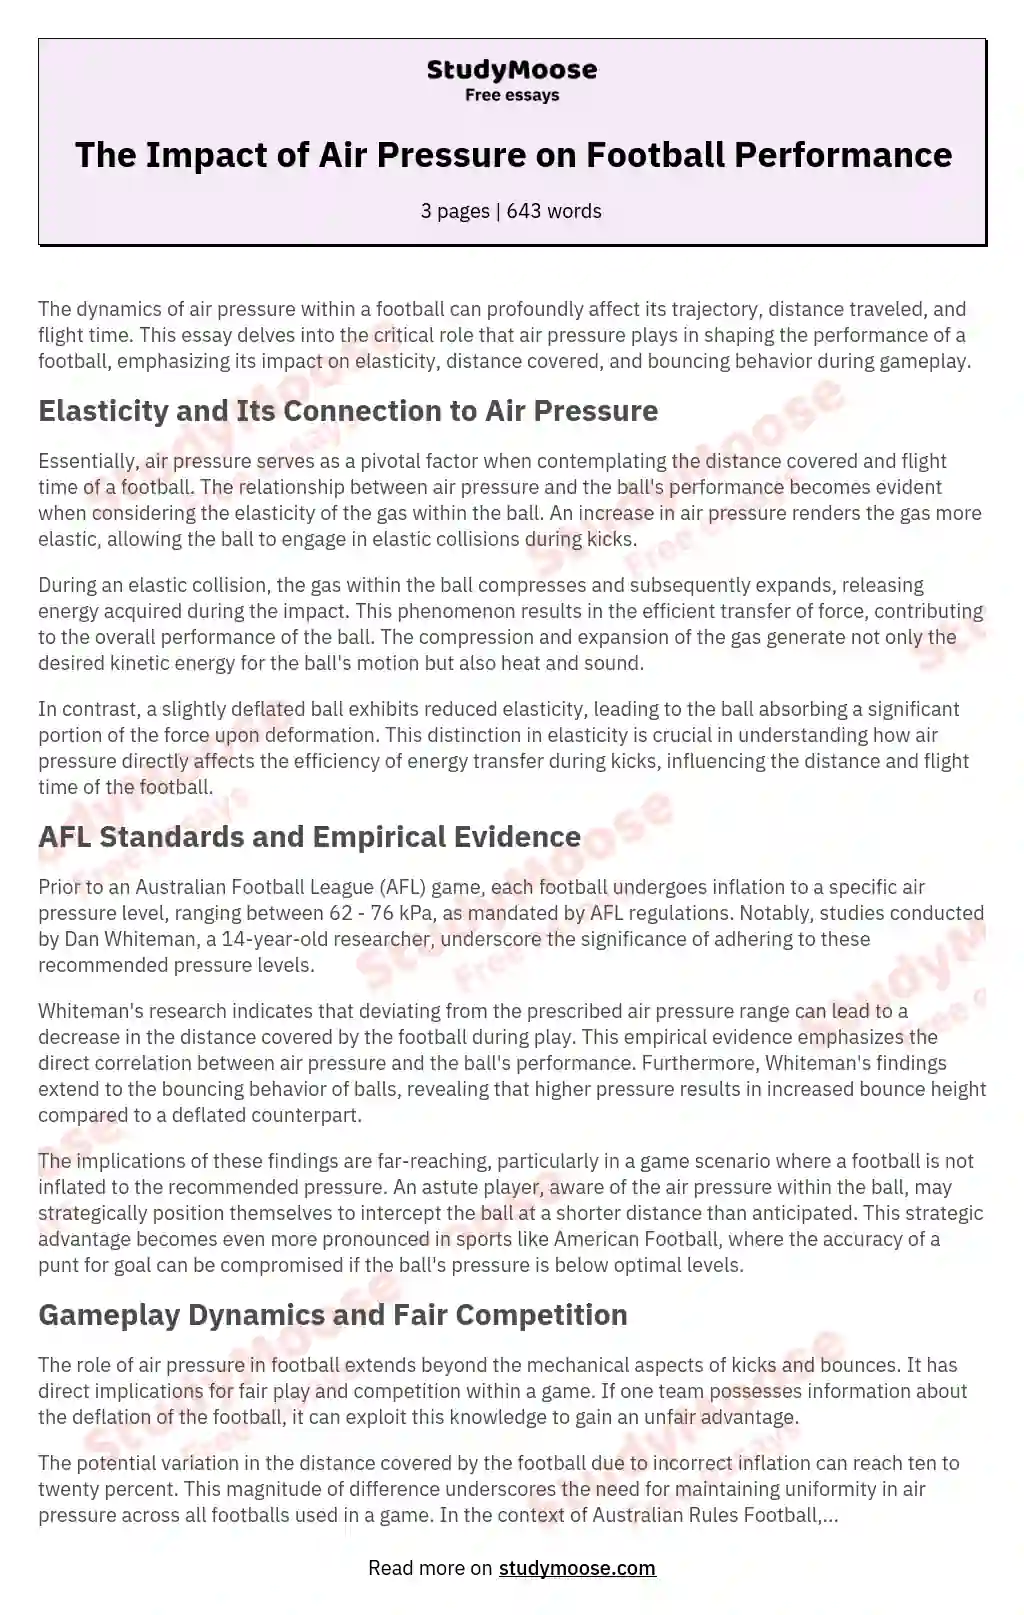 The Impact of Air Pressure on Football Performance essay